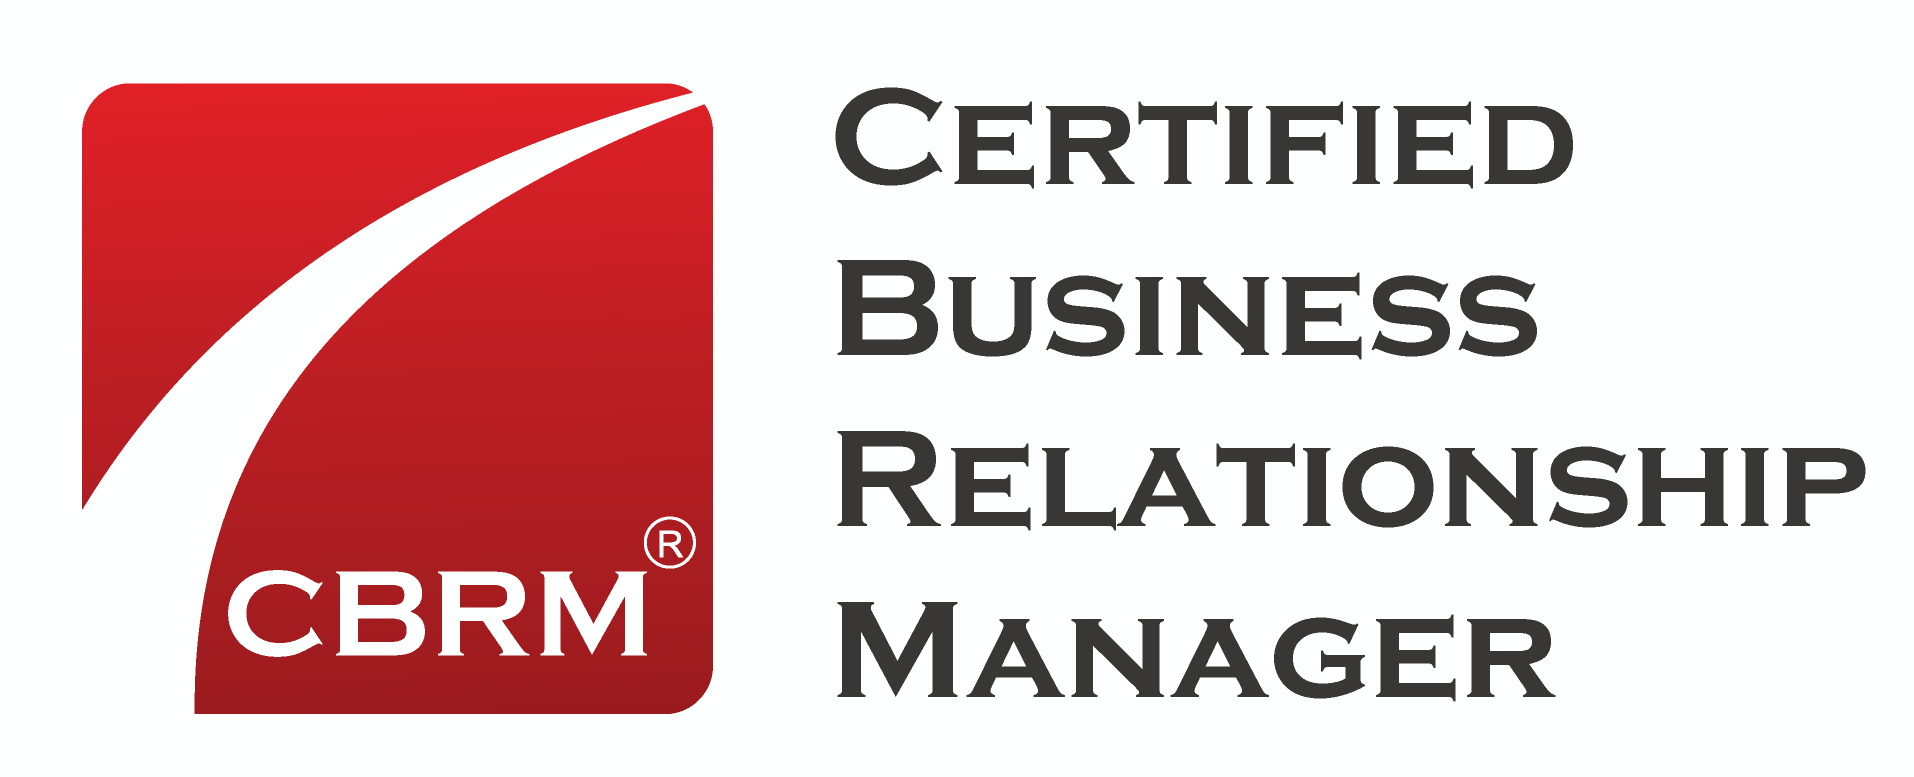 Download Certified Business Relationship Manager